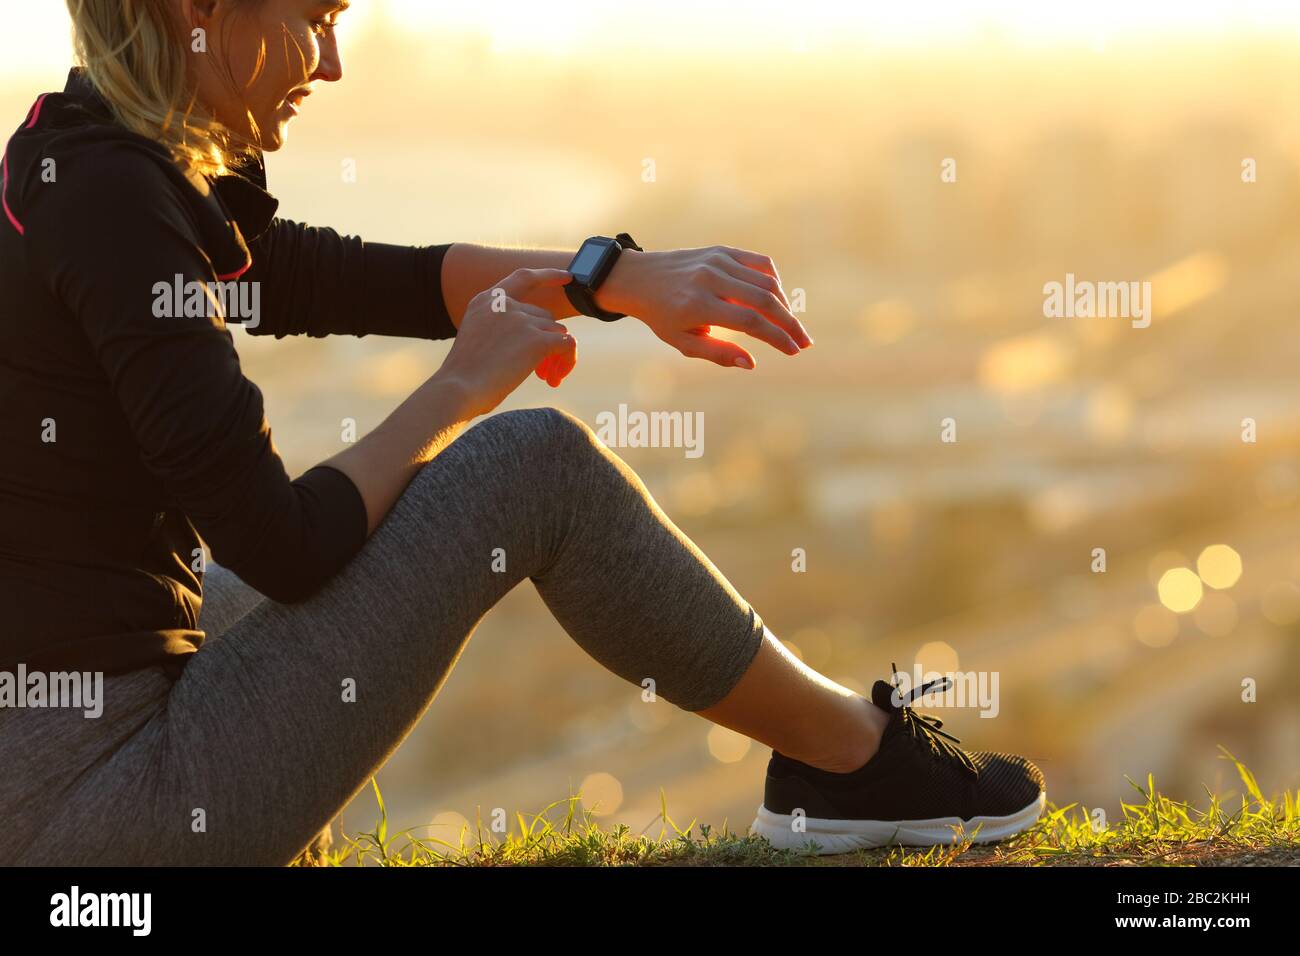 Runner sitting on the ground checking smartwatch after running at sunset Stock Photo